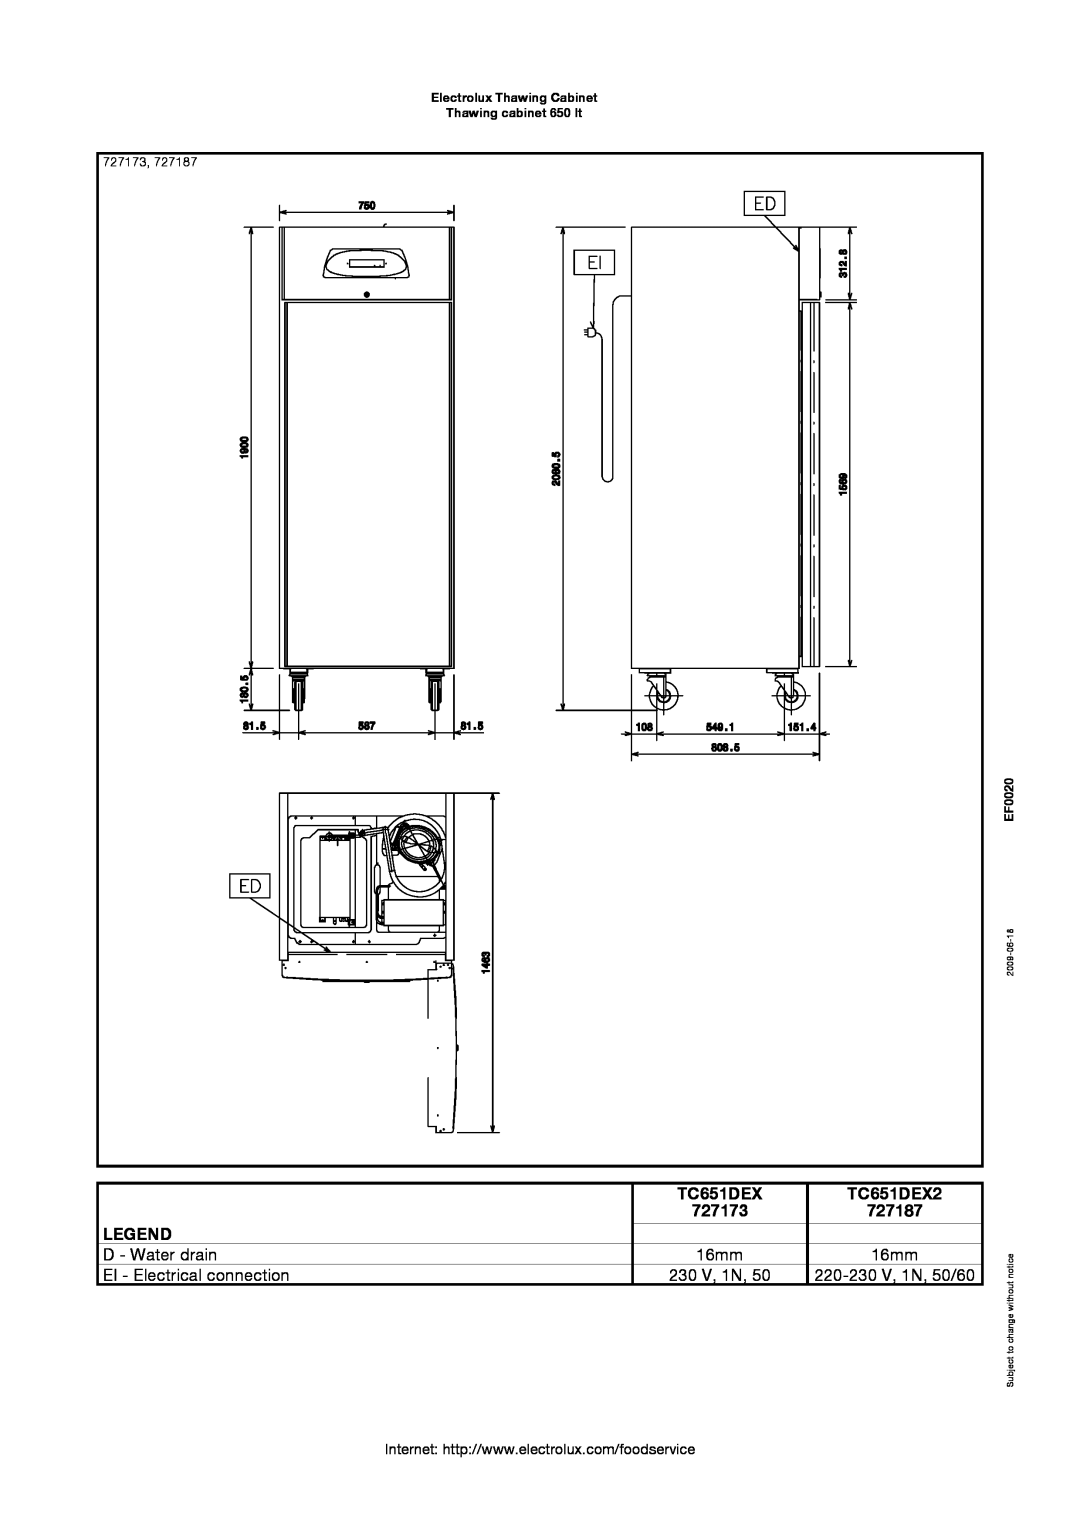 Electrolux TC651DEX2, 727173, 727187, 16mm, Electrolux Thawing Cabinet Thawing cabinet 650 lt, EF0020, 2009-06-18 